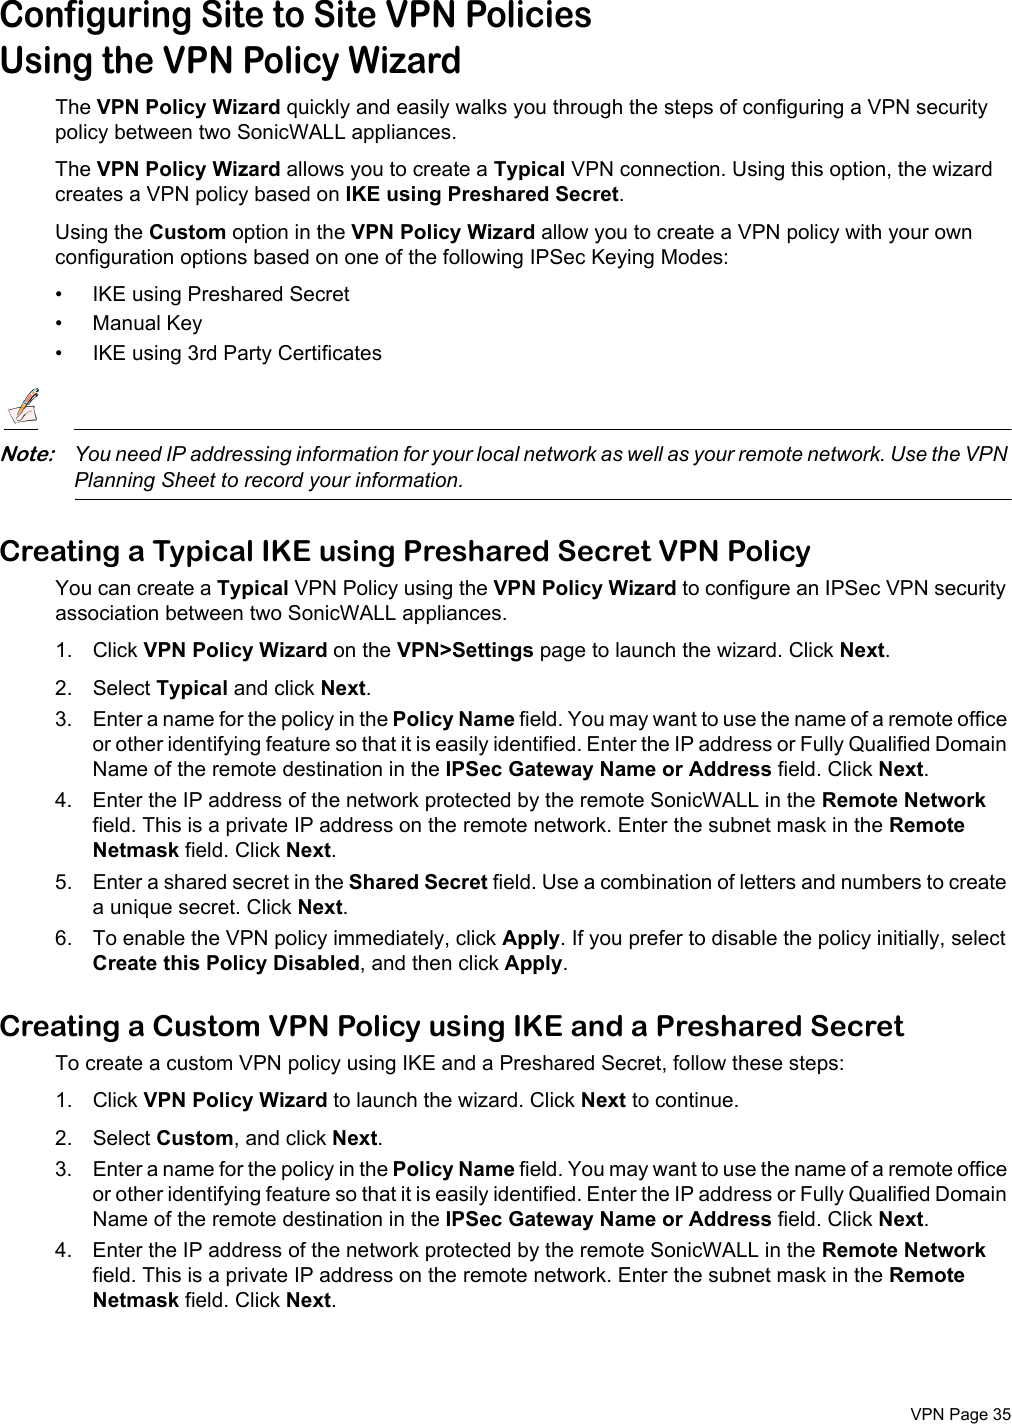  VPN Page 35Configuring Site to Site VPN PoliciesUsing the VPN Policy WizardThe VPN Policy Wizard quickly and easily walks you through the steps of configuring a VPN security policy between two SonicWALL appliances. The VPN Policy Wizard allows you to create a Typical VPN connection. Using this option, the wizard creates a VPN policy based on IKE using Preshared Secret.Using the Custom option in the VPN Policy Wizard allow you to create a VPN policy with your own configuration options based on one of the following IPSec Keying Modes:• IKE using Preshared Secret• Manual Key• IKE using 3rd Party CertificatesNote:You need IP addressing information for your local network as well as your remote network. Use the VPN Planning Sheet to record your information. Creating a Typical IKE using Preshared Secret VPN PolicyYou can create a Typical VPN Policy using the VPN Policy Wizard to configure an IPSec VPN security association between two SonicWALL appliances. 1. Click VPN Policy Wizard on the VPN&gt;Settings page to launch the wizard. Click Next.2. Select Typical and click Next.3. Enter a name for the policy in the Policy Name field. You may want to use the name of a remote office or other identifying feature so that it is easily identified. Enter the IP address or Fully Qualified Domain Name of the remote destination in the IPSec Gateway Name or Address field. Click Next.4. Enter the IP address of the network protected by the remote SonicWALL in the Remote Network field. This is a private IP address on the remote network. Enter the subnet mask in the Remote Netmask field. Click Next.5. Enter a shared secret in the Shared Secret field. Use a combination of letters and numbers to create a unique secret. Click Next. 6. To enable the VPN policy immediately, click Apply. If you prefer to disable the policy initially, select Create this Policy Disabled, and then click Apply. Creating a Custom VPN Policy using IKE and a Preshared SecretTo create a custom VPN policy using IKE and a Preshared Secret, follow these steps:1. Click VPN Policy Wizard to launch the wizard. Click Next to continue. 2. Select Custom, and click Next. 3. Enter a name for the policy in the Policy Name field. You may want to use the name of a remote office or other identifying feature so that it is easily identified. Enter the IP address or Fully Qualified Domain Name of the remote destination in the IPSec Gateway Name or Address field. Click Next.4. Enter the IP address of the network protected by the remote SonicWALL in the Remote Network field. This is a private IP address on the remote network. Enter the subnet mask in the Remote Netmask field. Click Next.